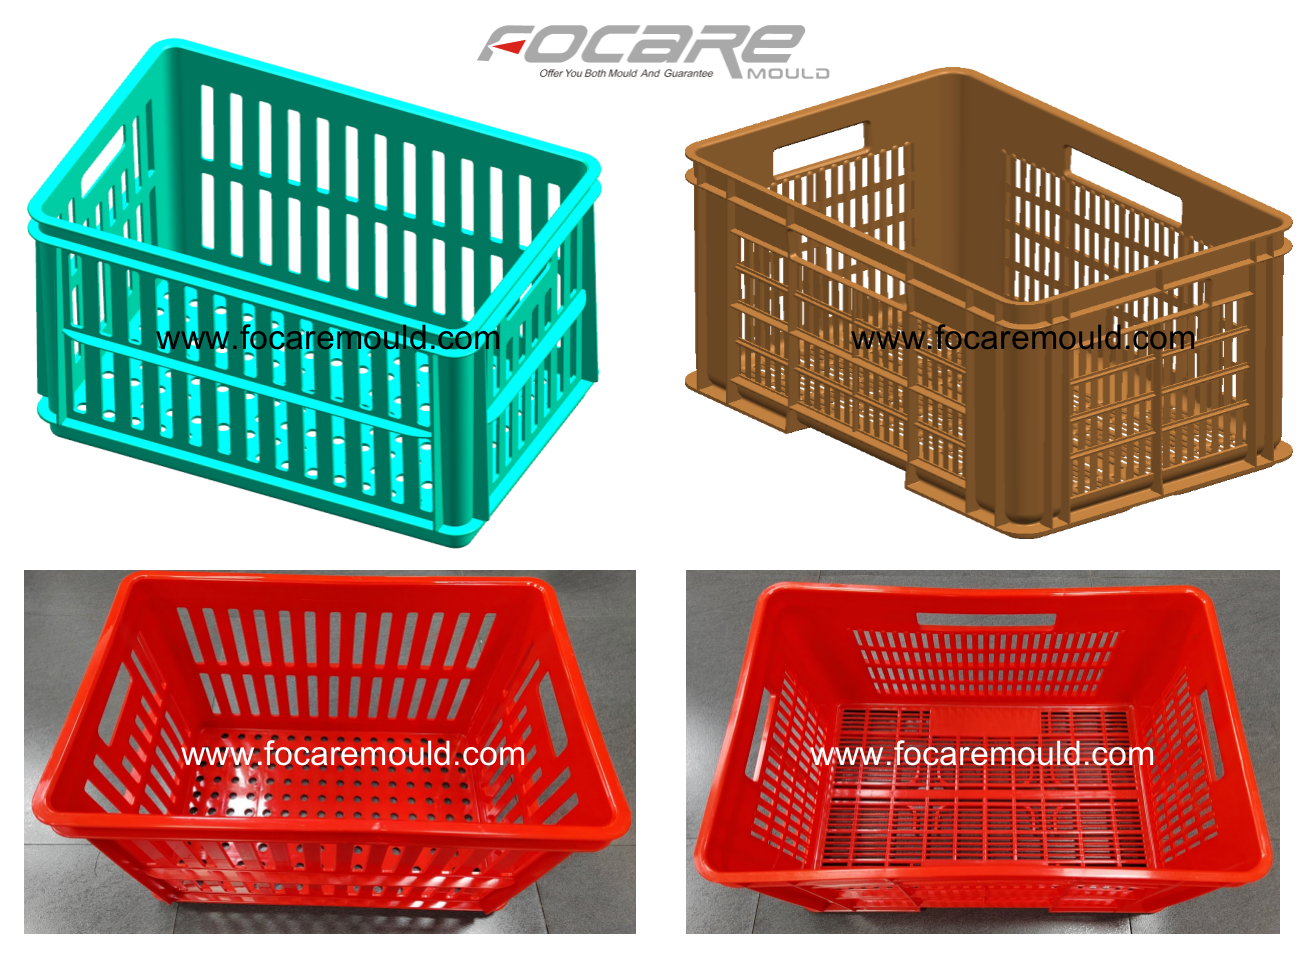 High quality Plastic crate injection mold Quotes,China Plastic crate injection mold Factory,Plastic crate injection mold Purchasing